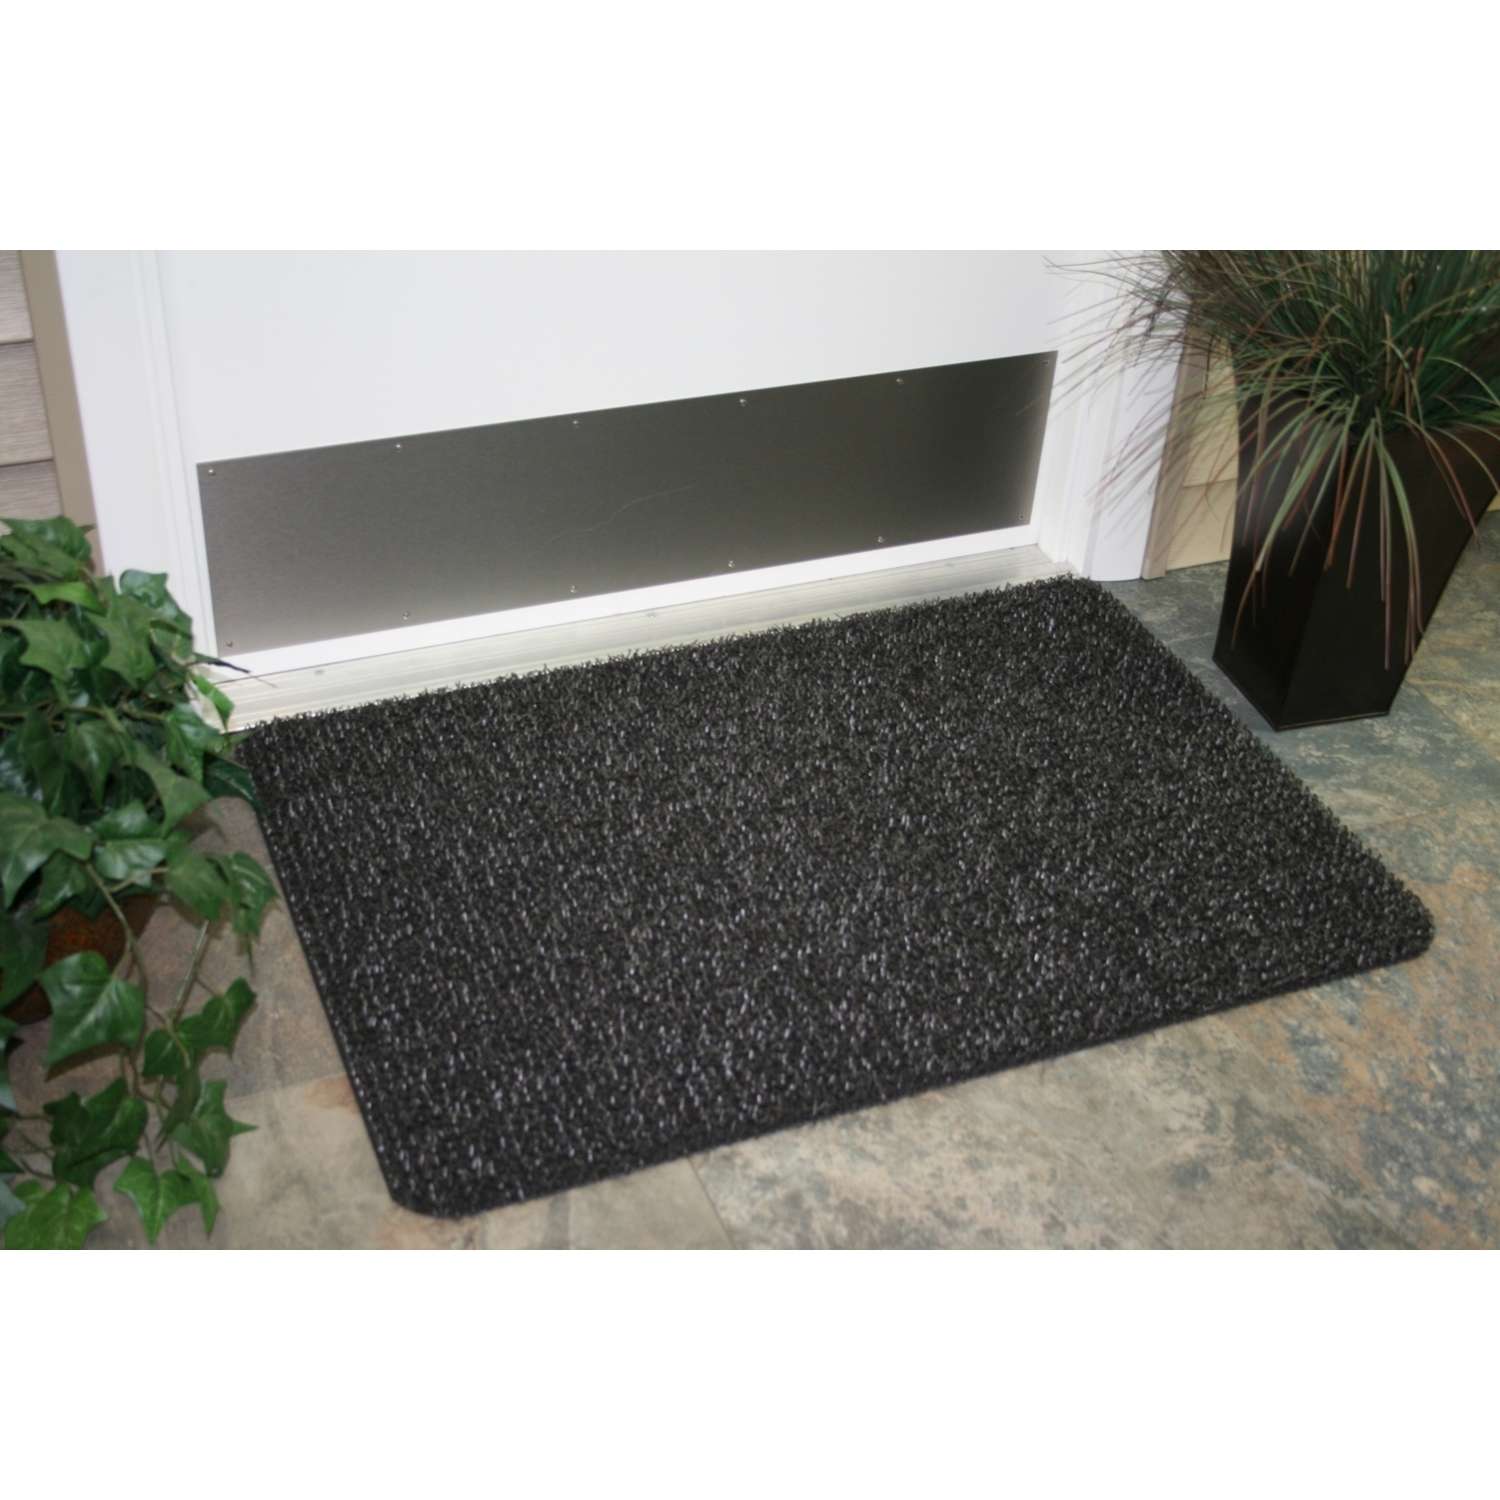 Make an AstroTurf Doormat to Keep the Dirt Out - A Crafty Mix